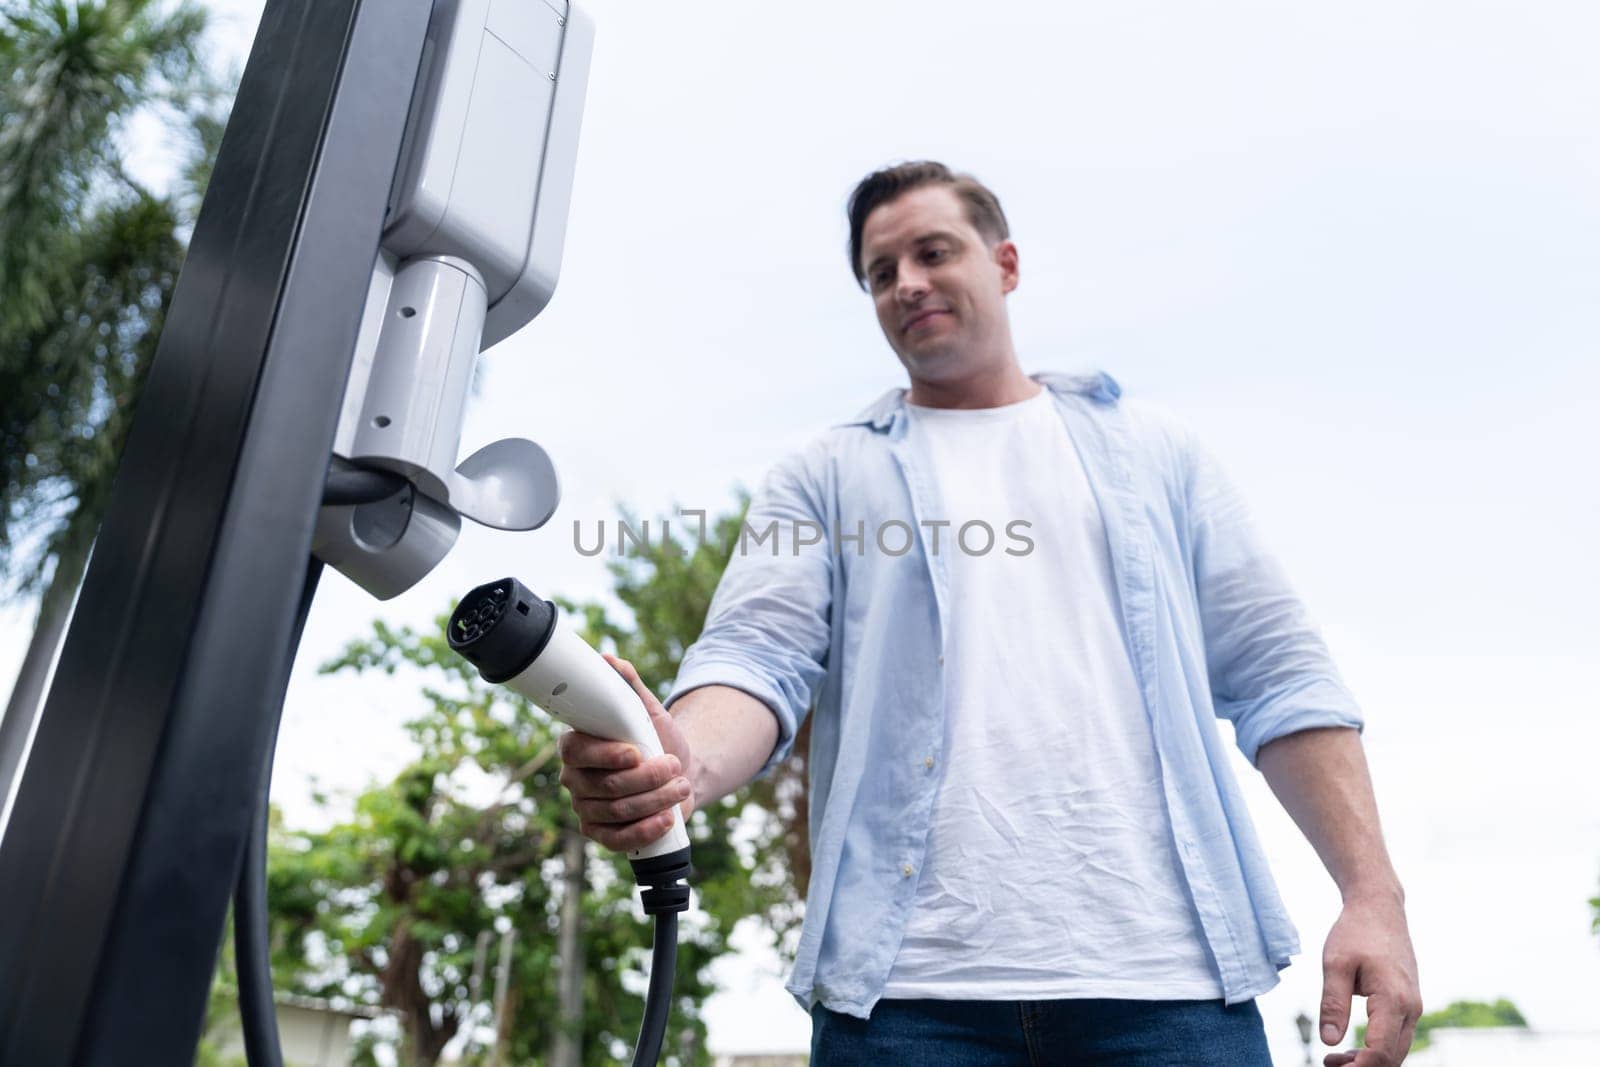 Eco-friendly conscious man recharging modern electric vehicle from EV charging station. EV car technology utilized as alternative transportation for future sustainability. Synchronos